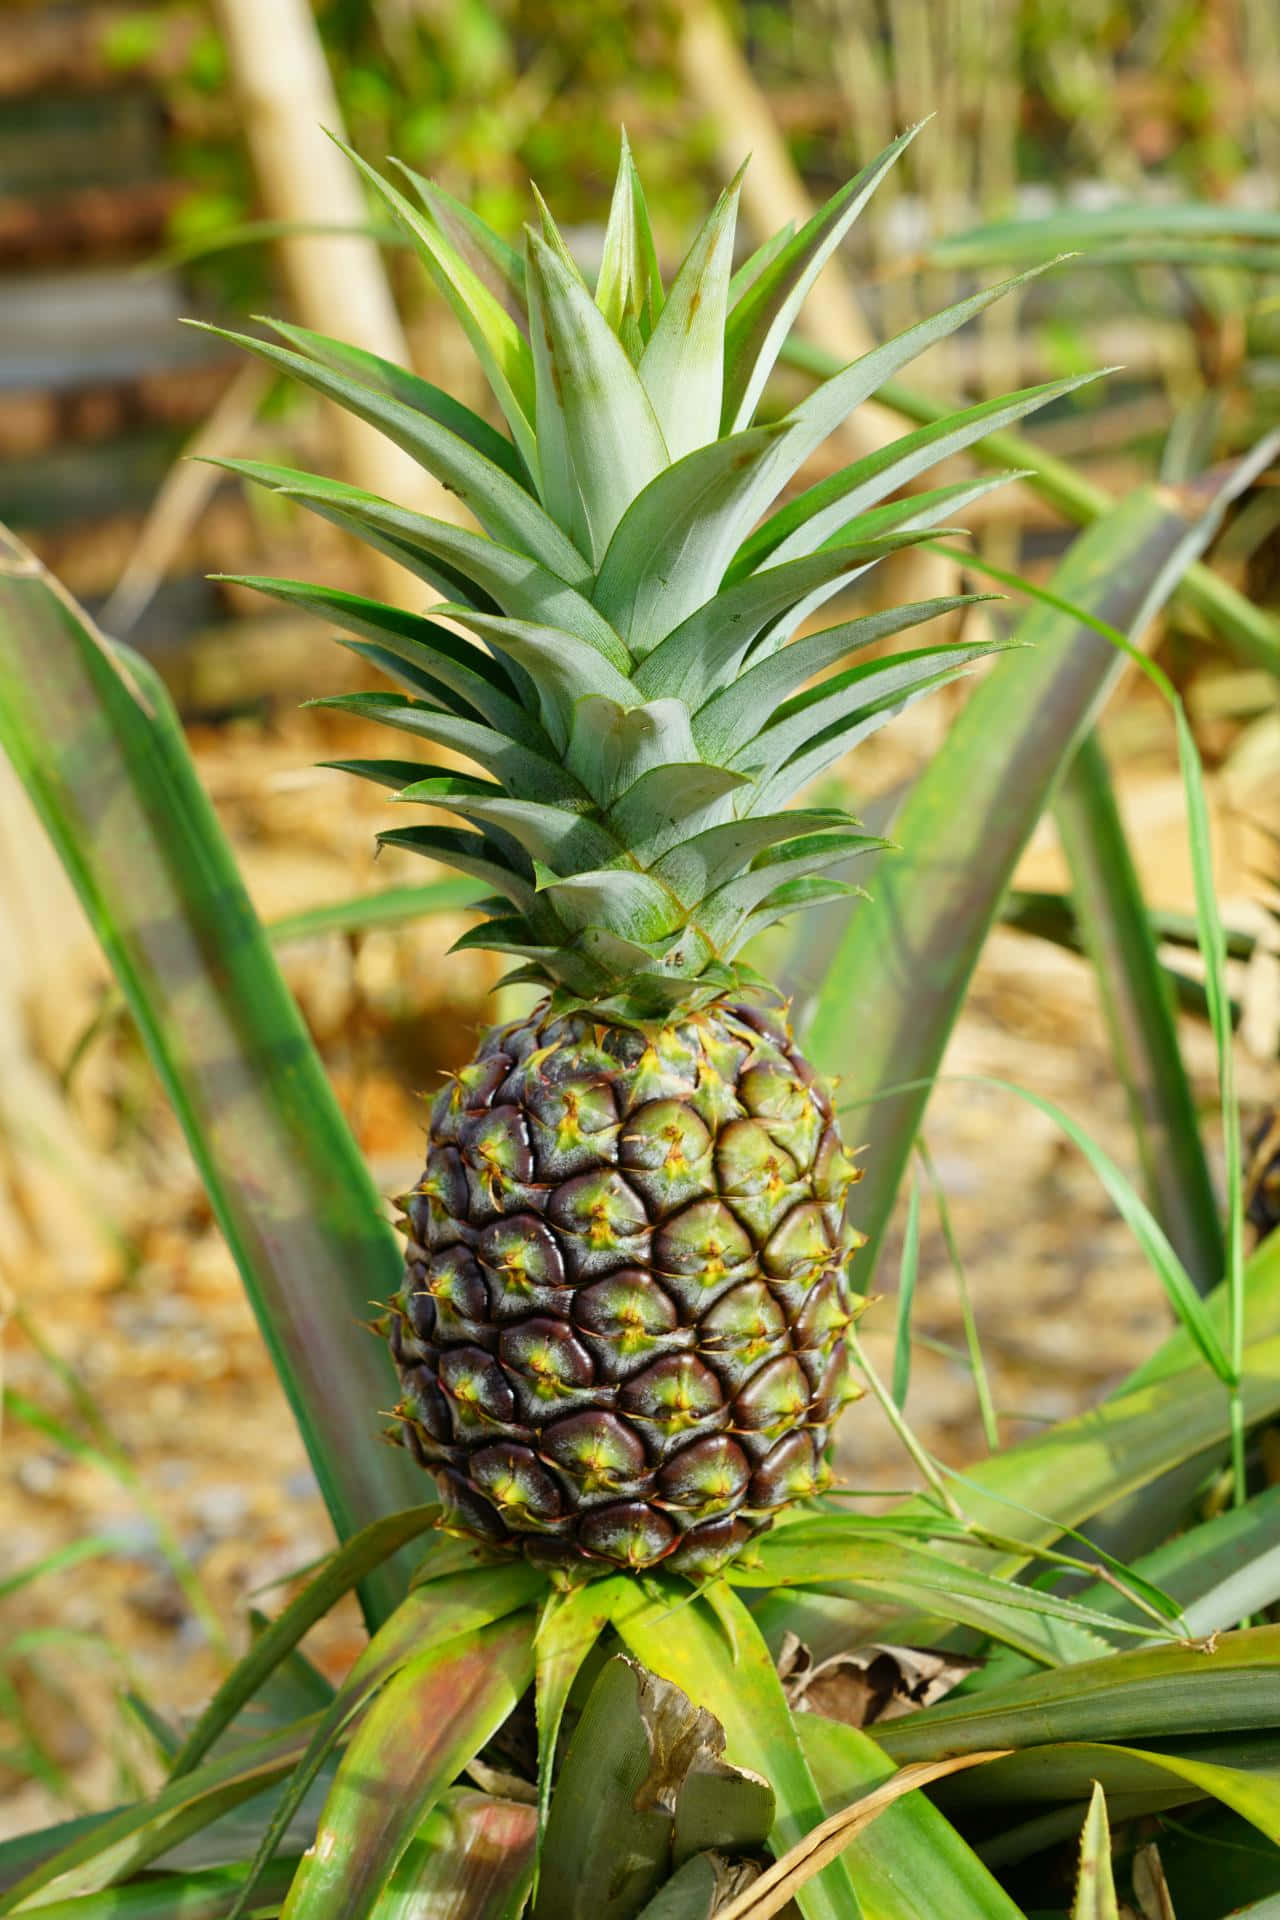 Enjoy the sweetness of a perfectly ripe pineapple